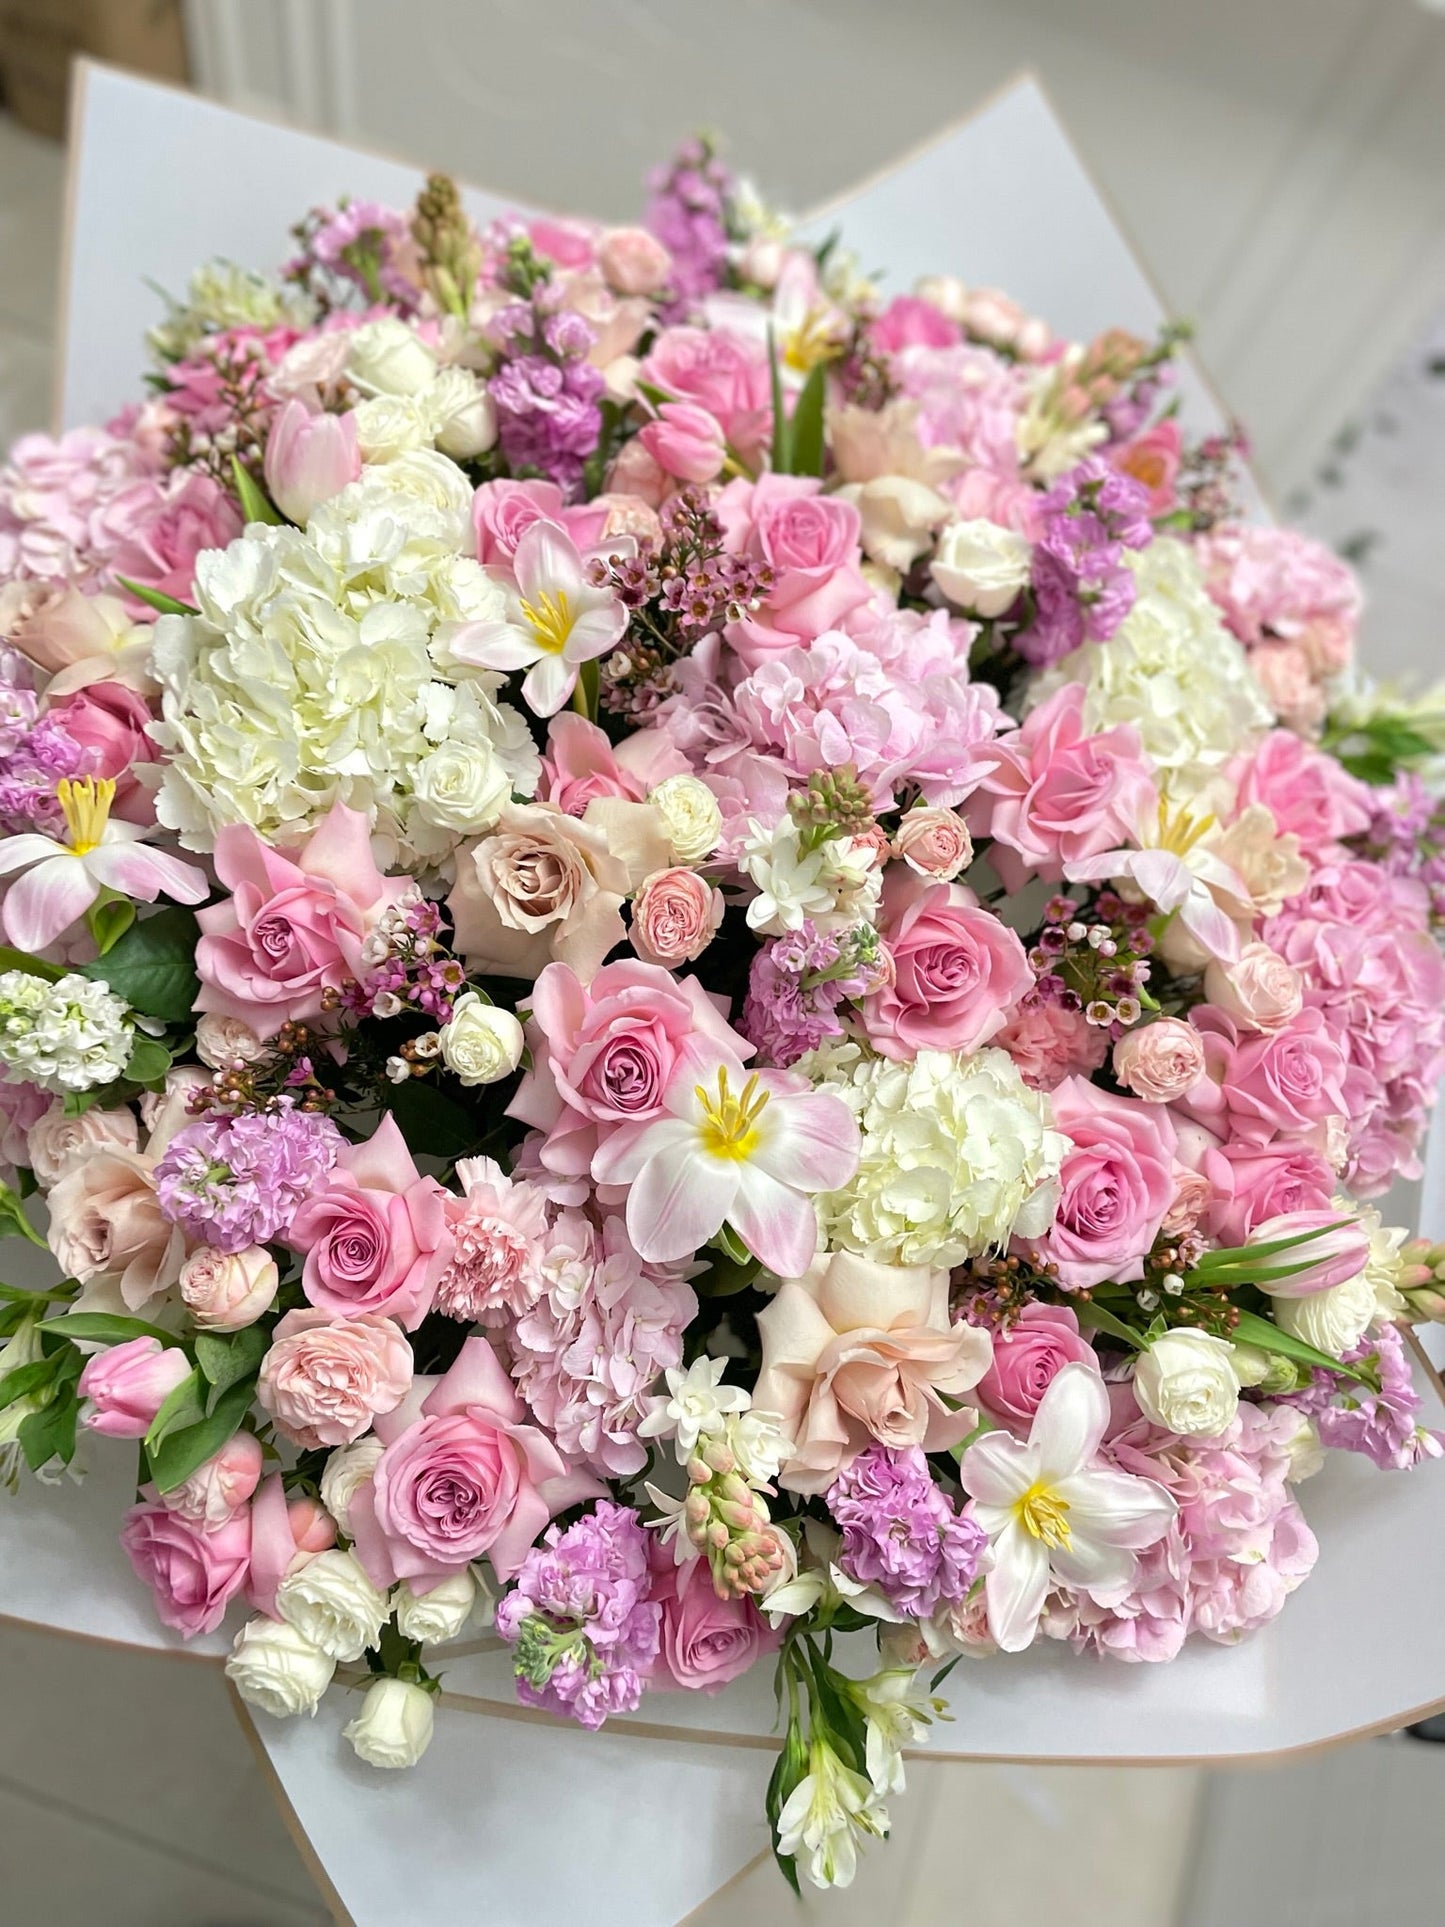 A jumbo sized bouquet of mixed pink flowers